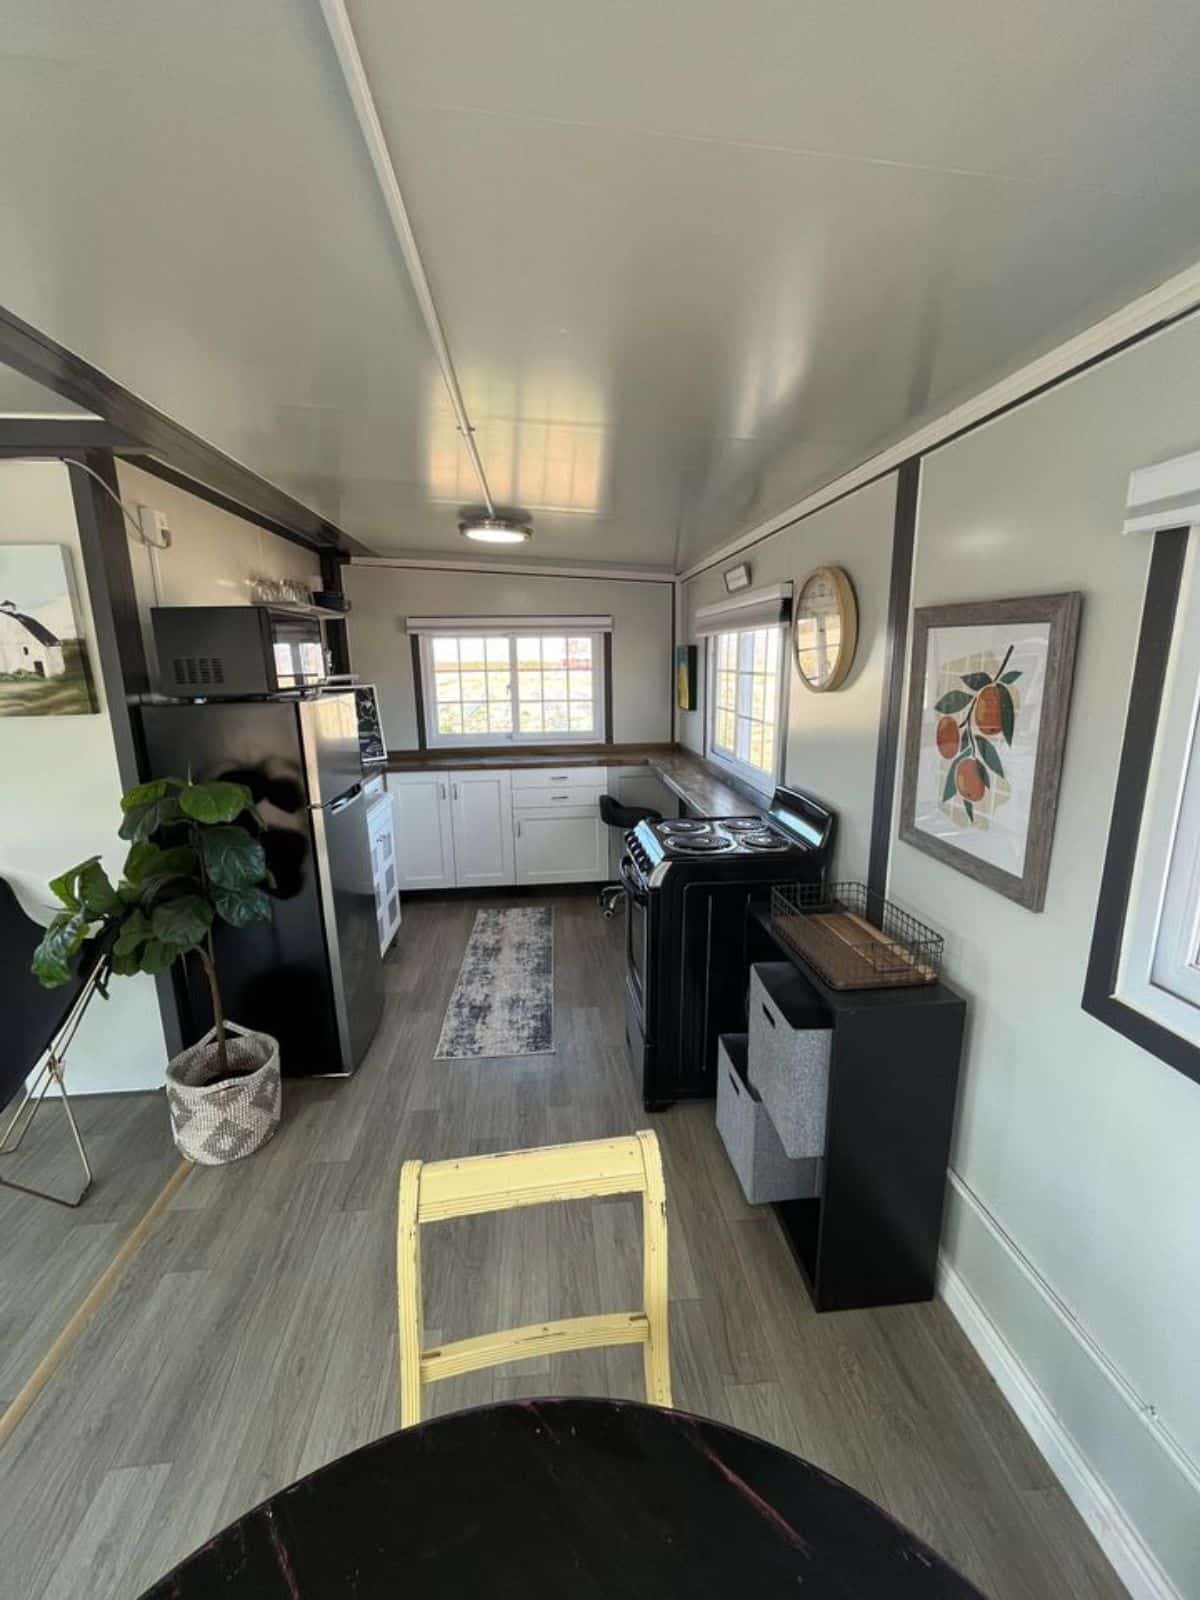 Kitchen area view of 20’ unique tiny home